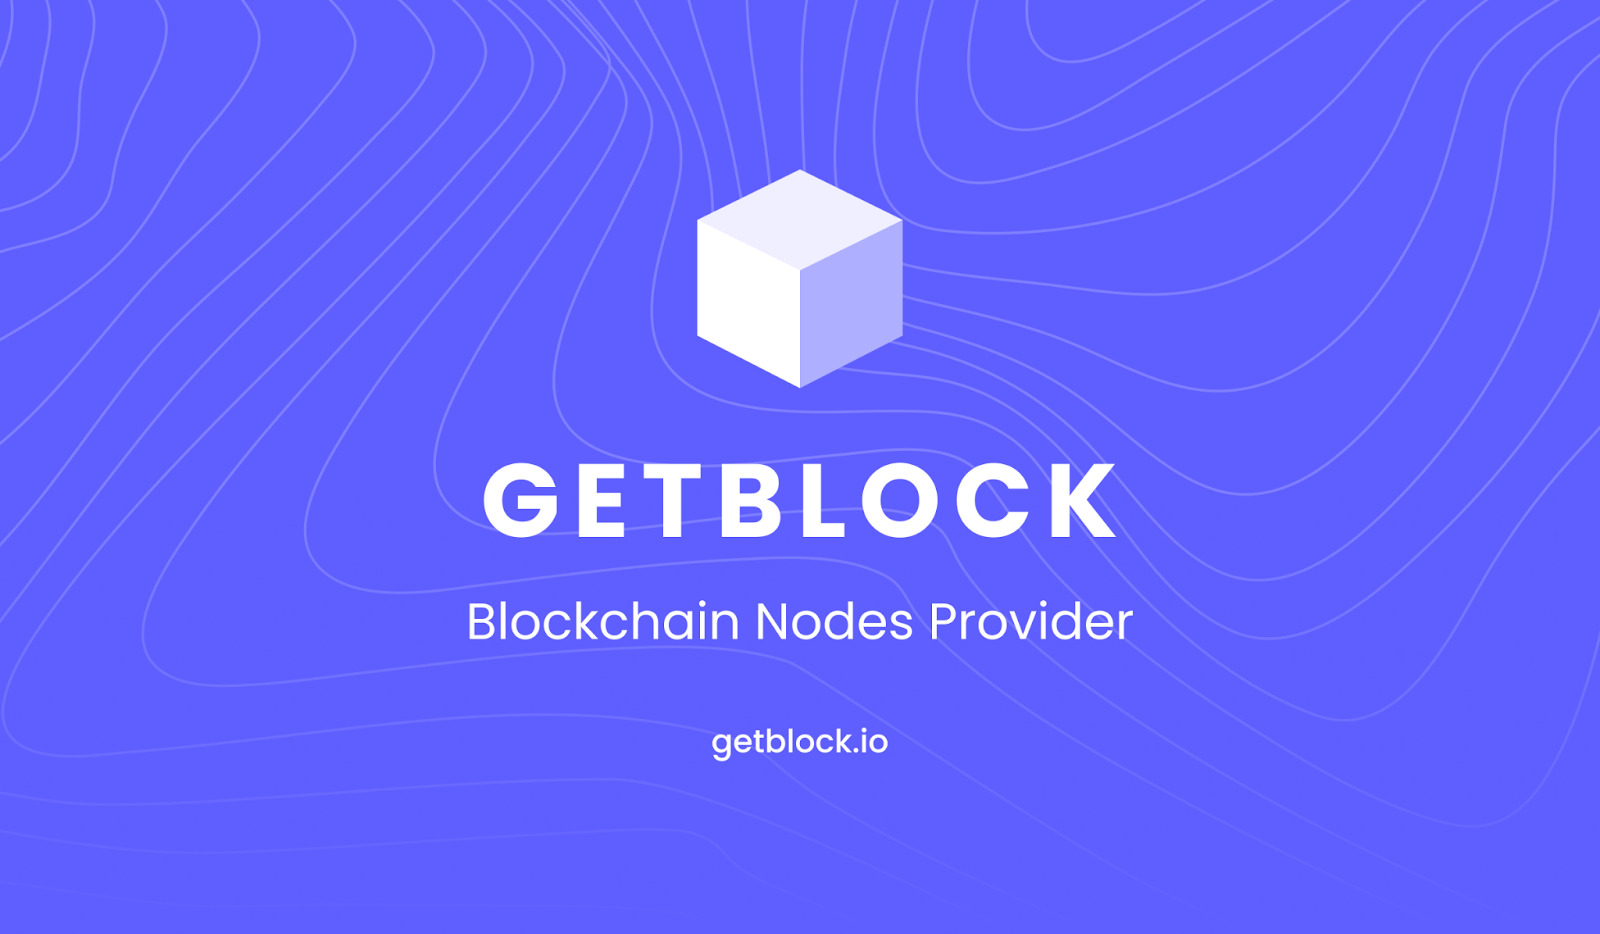 GetBlock Gives Developers Access to Numerous Blockchain Nodes